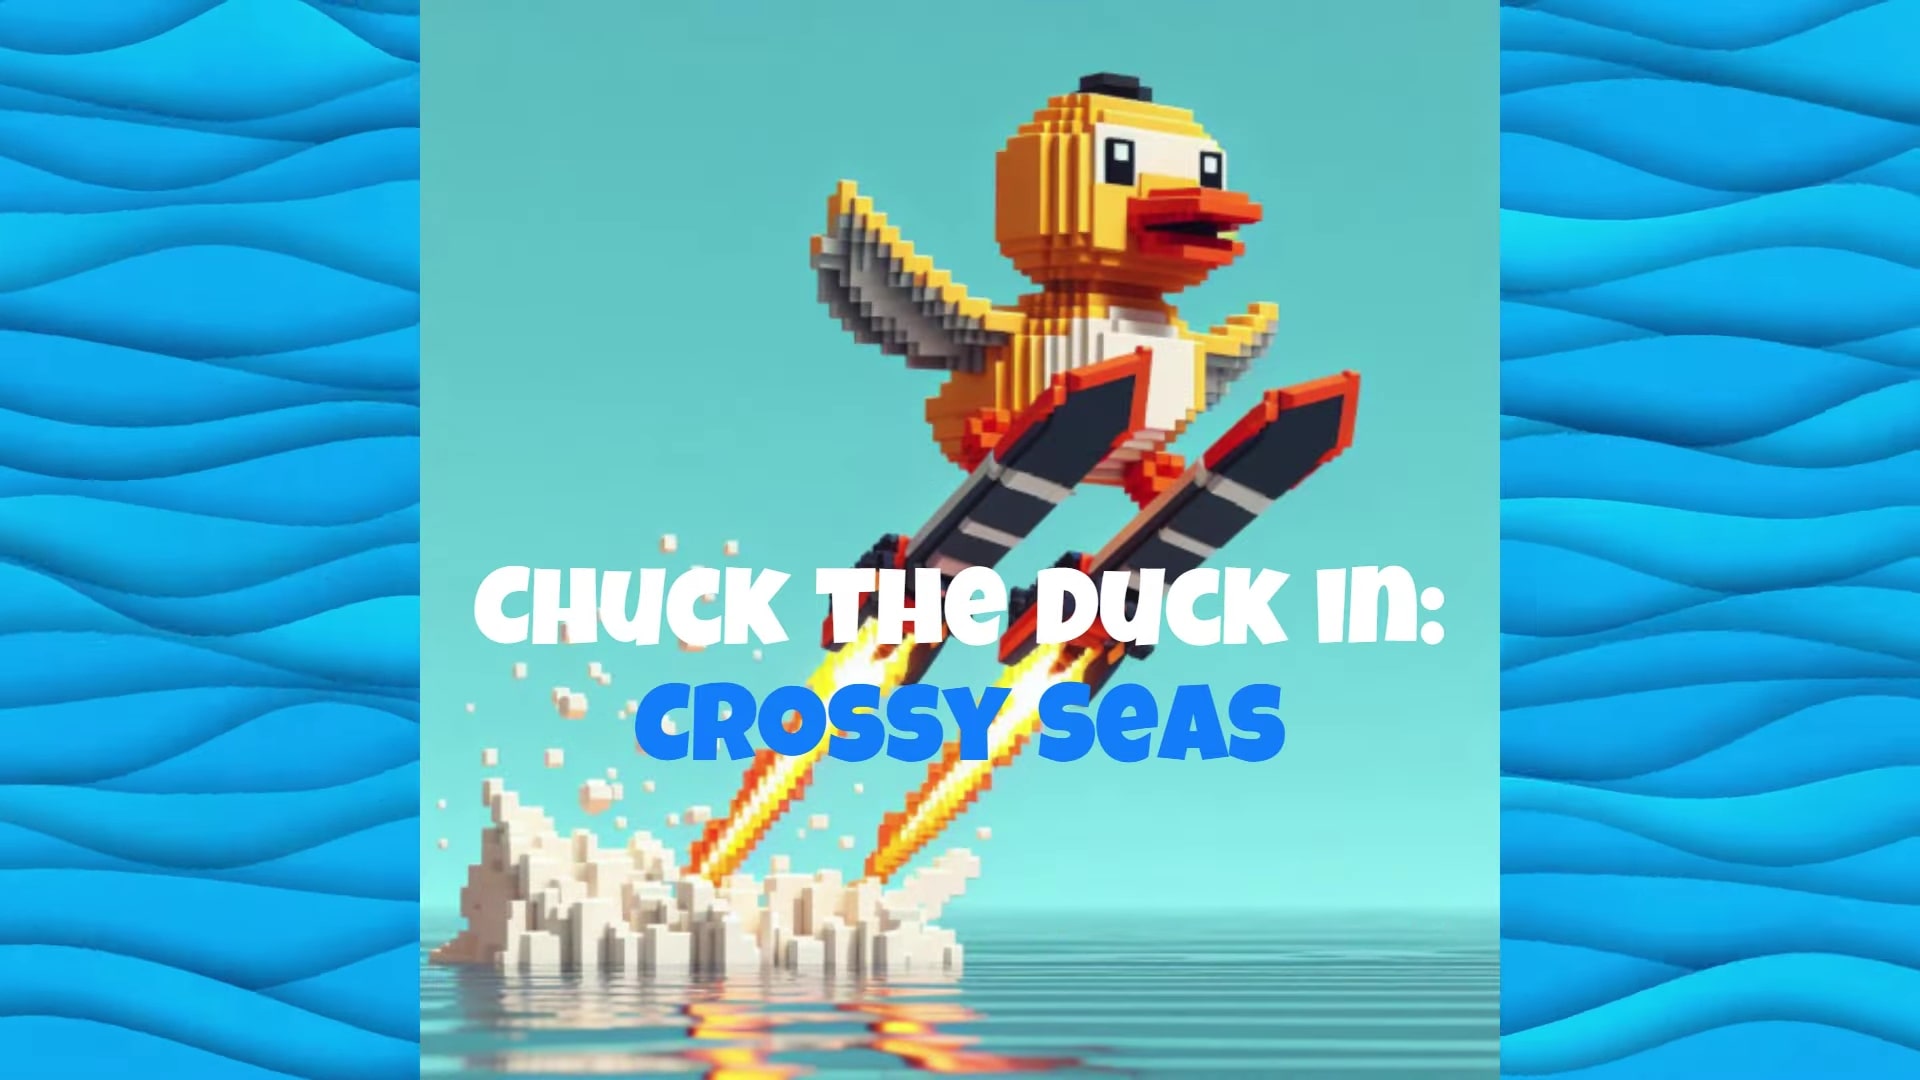 Introducing "Chuck The Duck" With A New And Fun Roguelike Adventure!